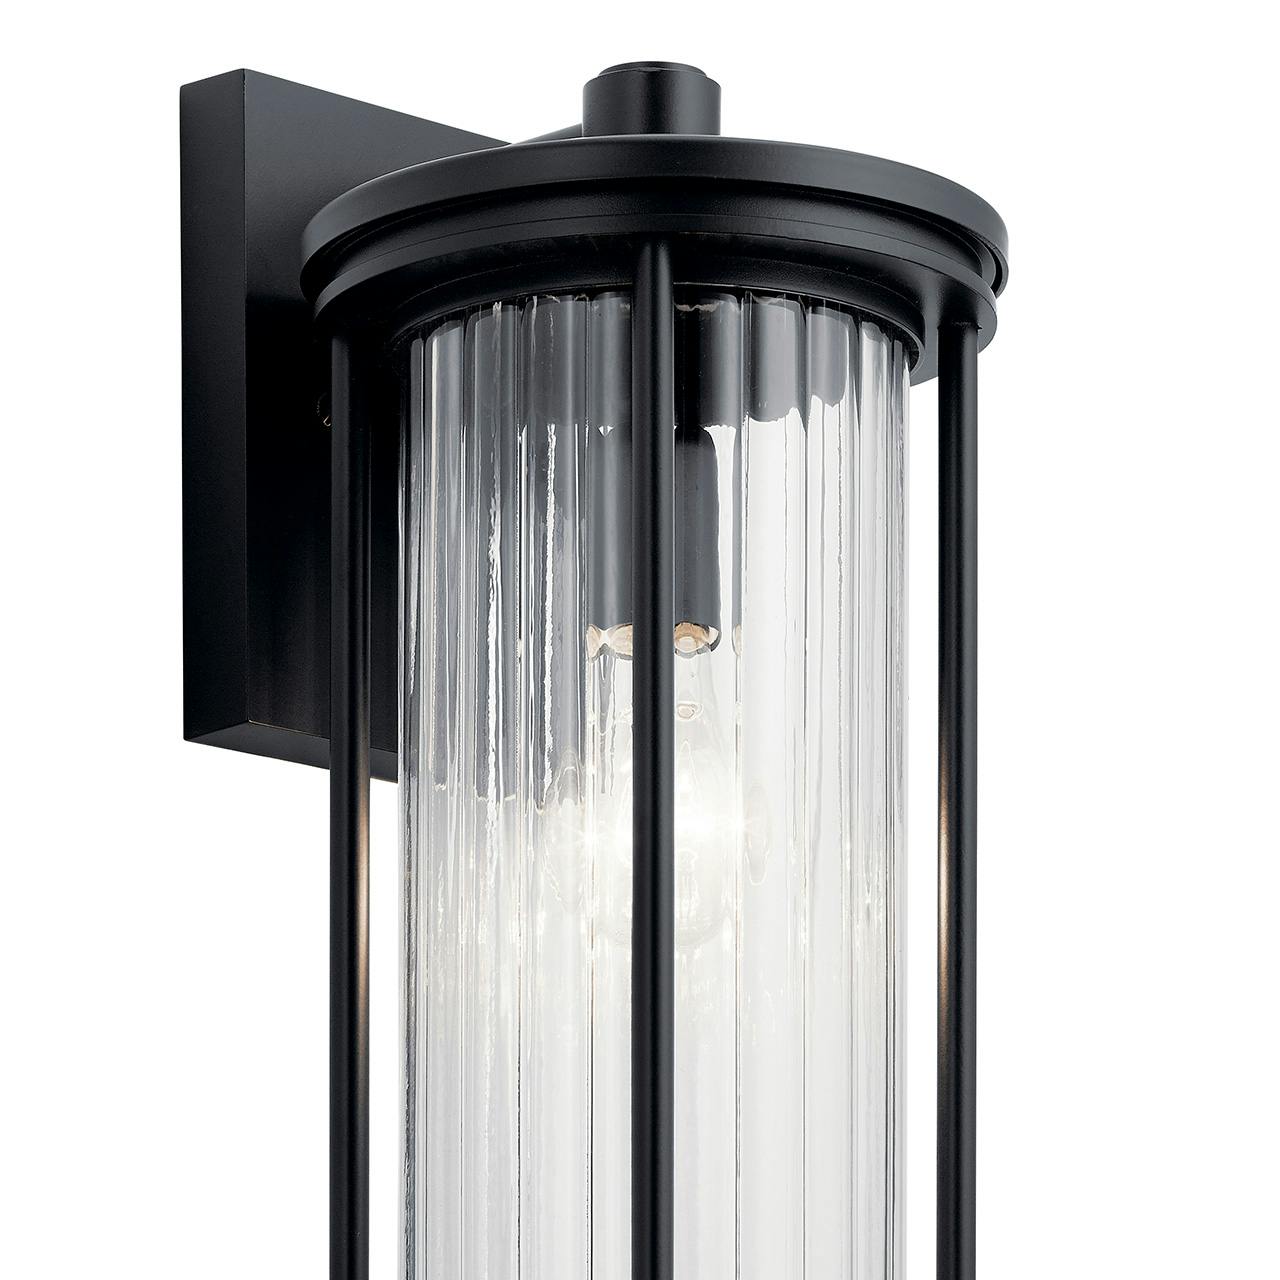 Close up view of the Barras 16" 1 Light Wall Light Black on a white background